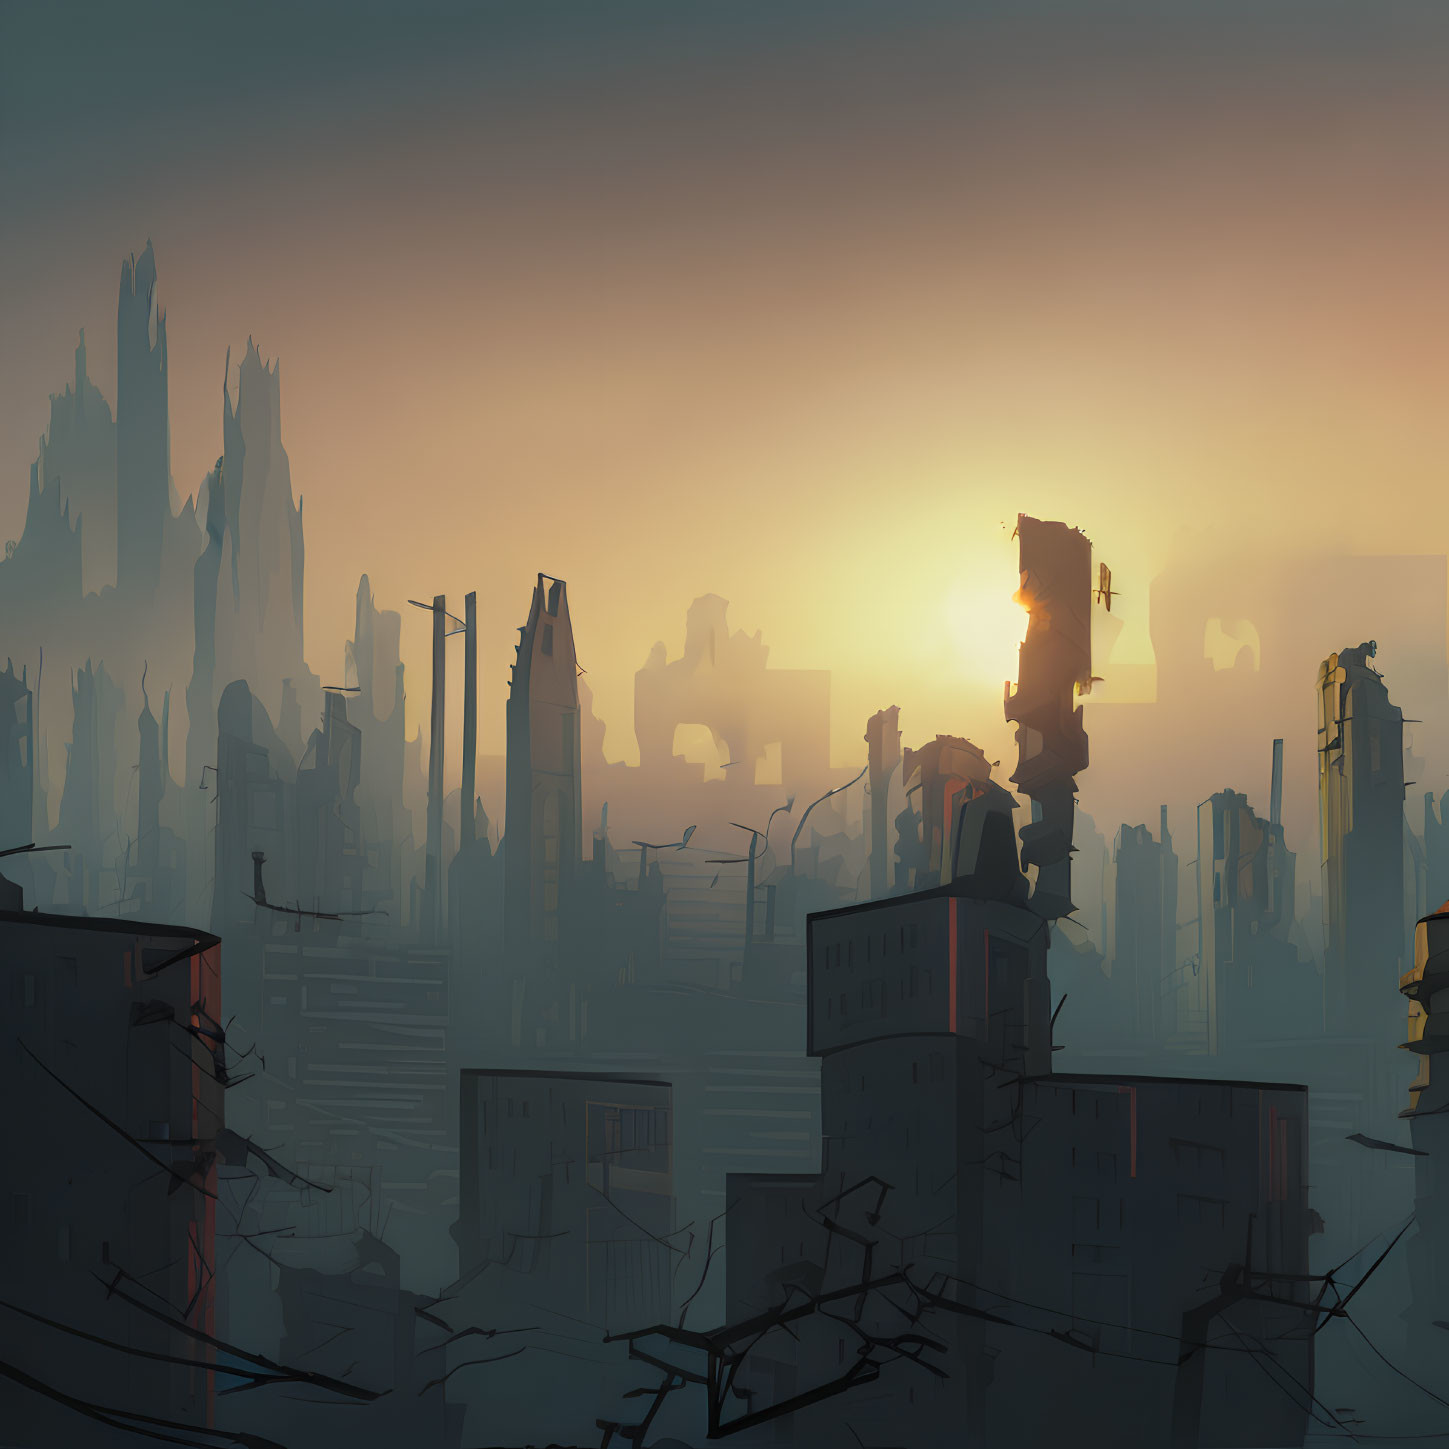 Post-Apocalyptic Cityscape at Sunrise with Ruined Buildings